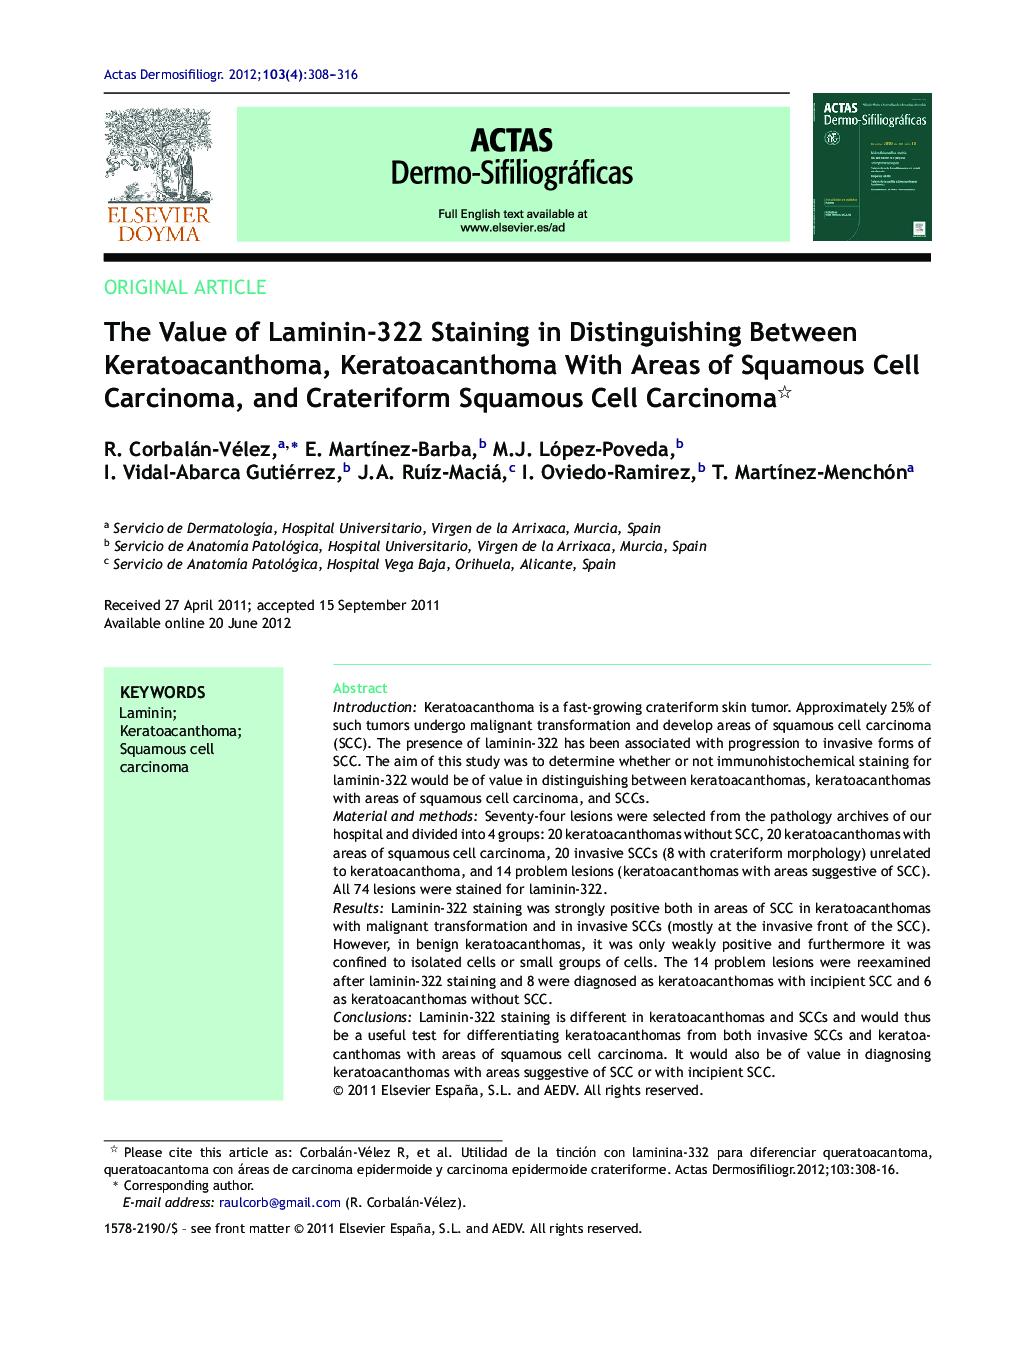 The Value of Laminin-322 Staining in Distinguishing Between Keratoacanthoma, Keratoacanthoma With Areas of Squamous Cell Carcinoma, and Crateriform Squamous Cell Carcinoma 